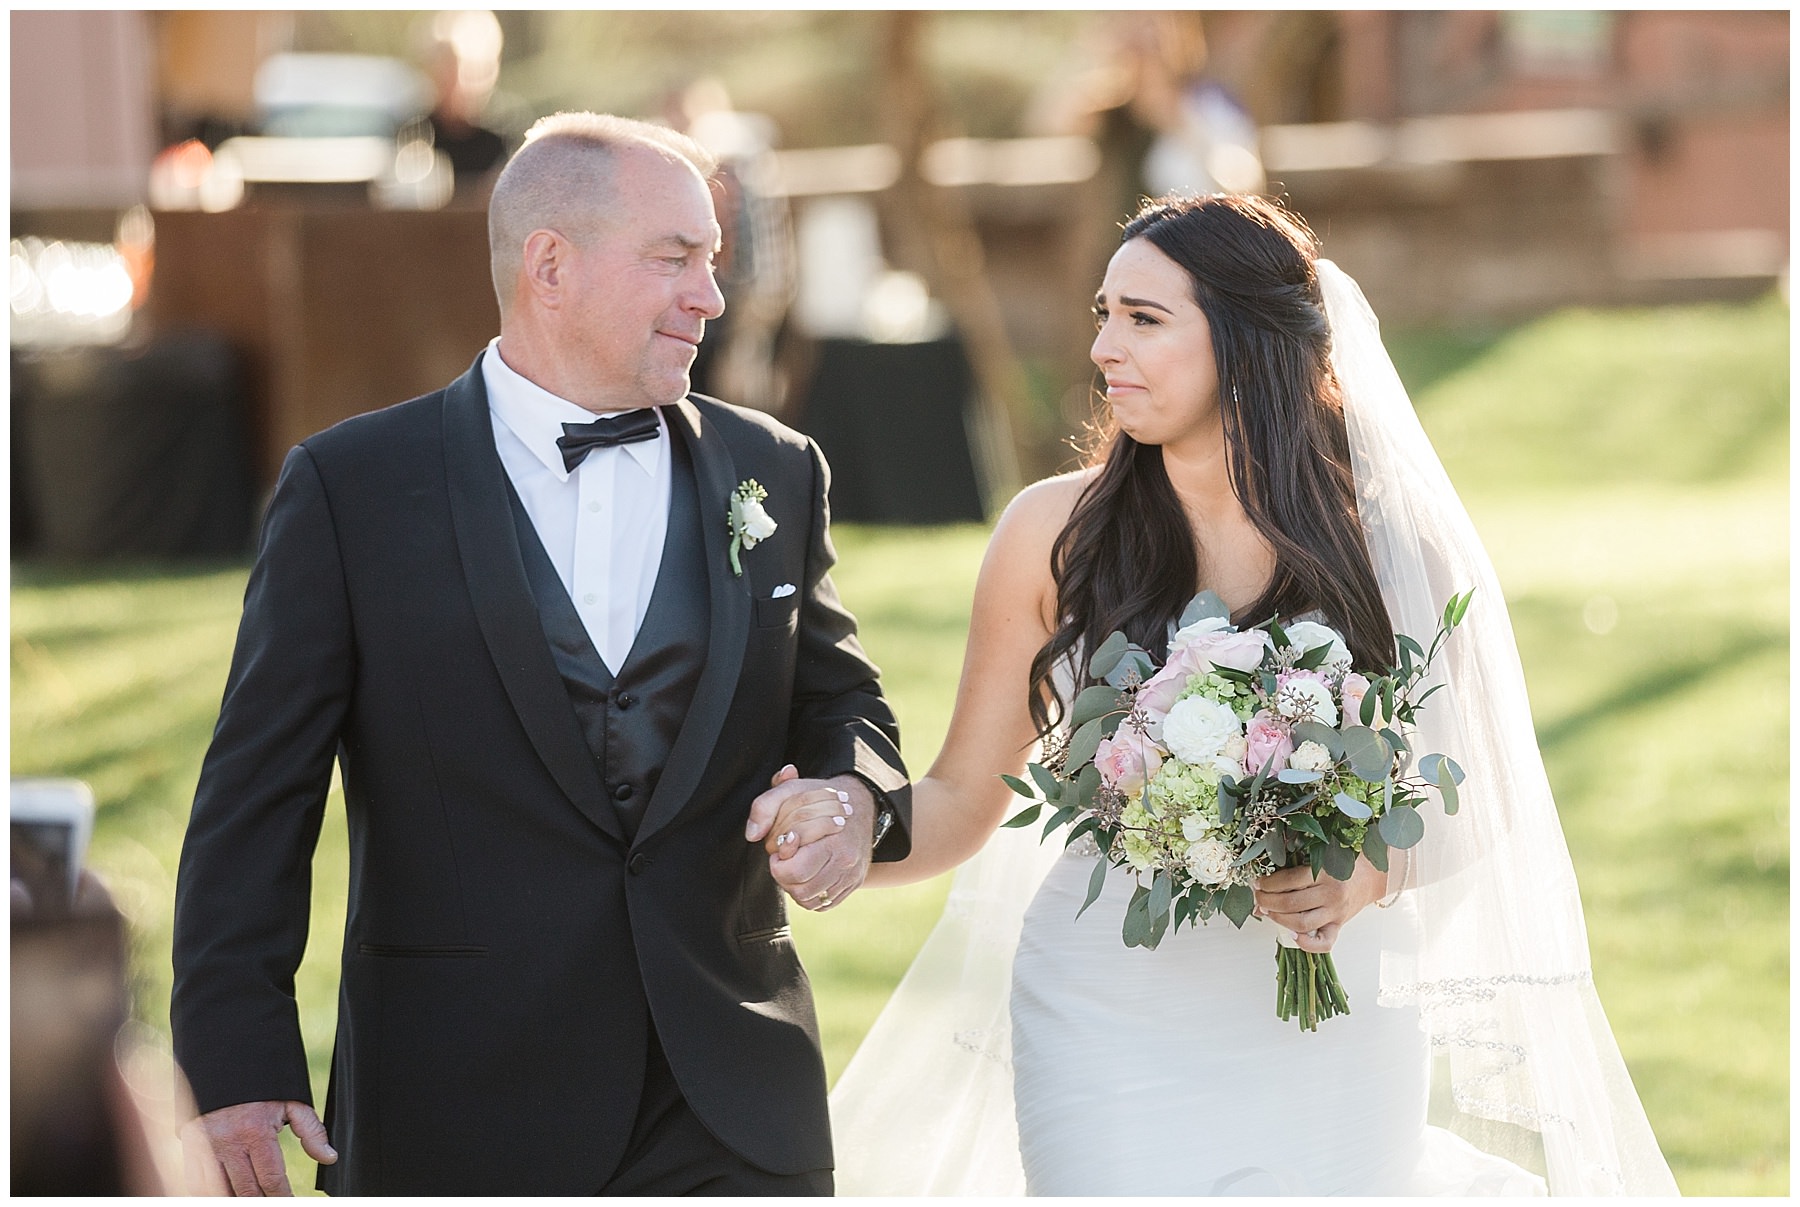 Emotional Bride and Father walking down aisle at wedding